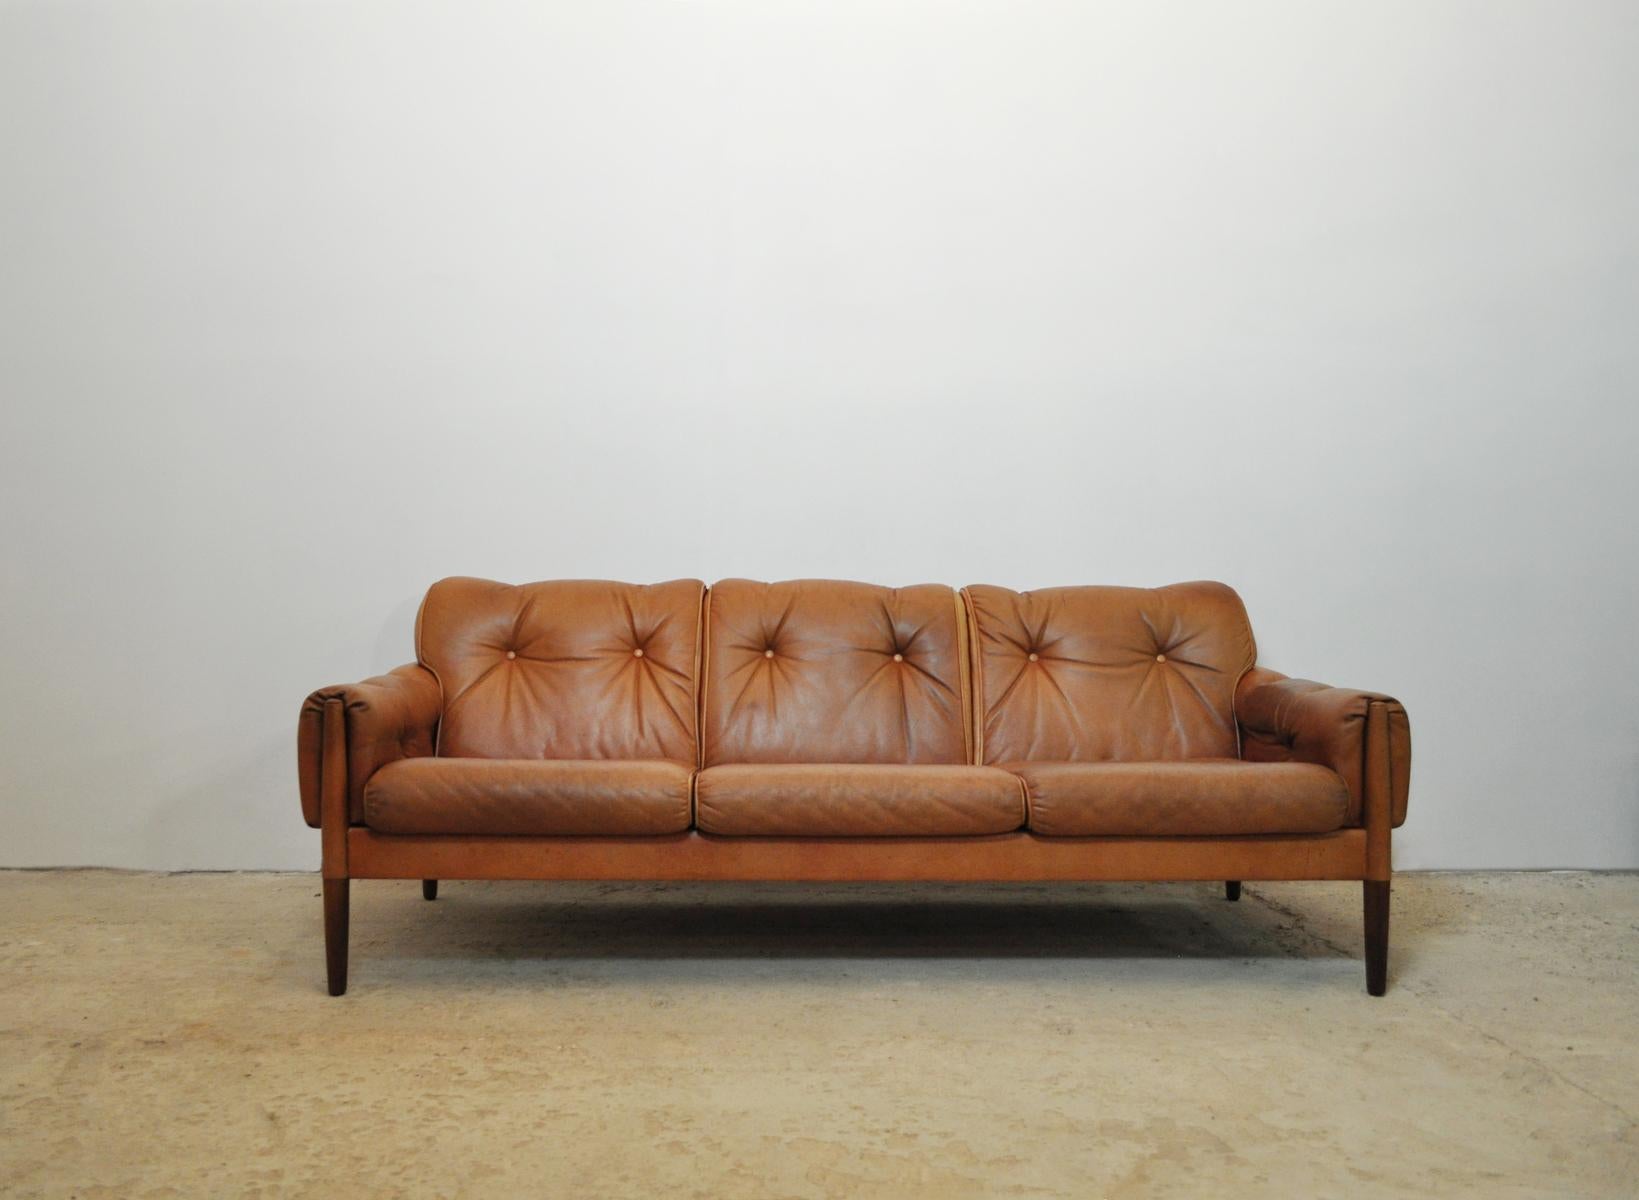 Scandinavian cognac brown leather and rosewood 3-seater sofa.
Probably Danish from 1960s. Good vintage condition. 
Patinated with signs of wear consistent with age and use.

Also a set of 2 Lounge Chairs - see the last picture and search for item